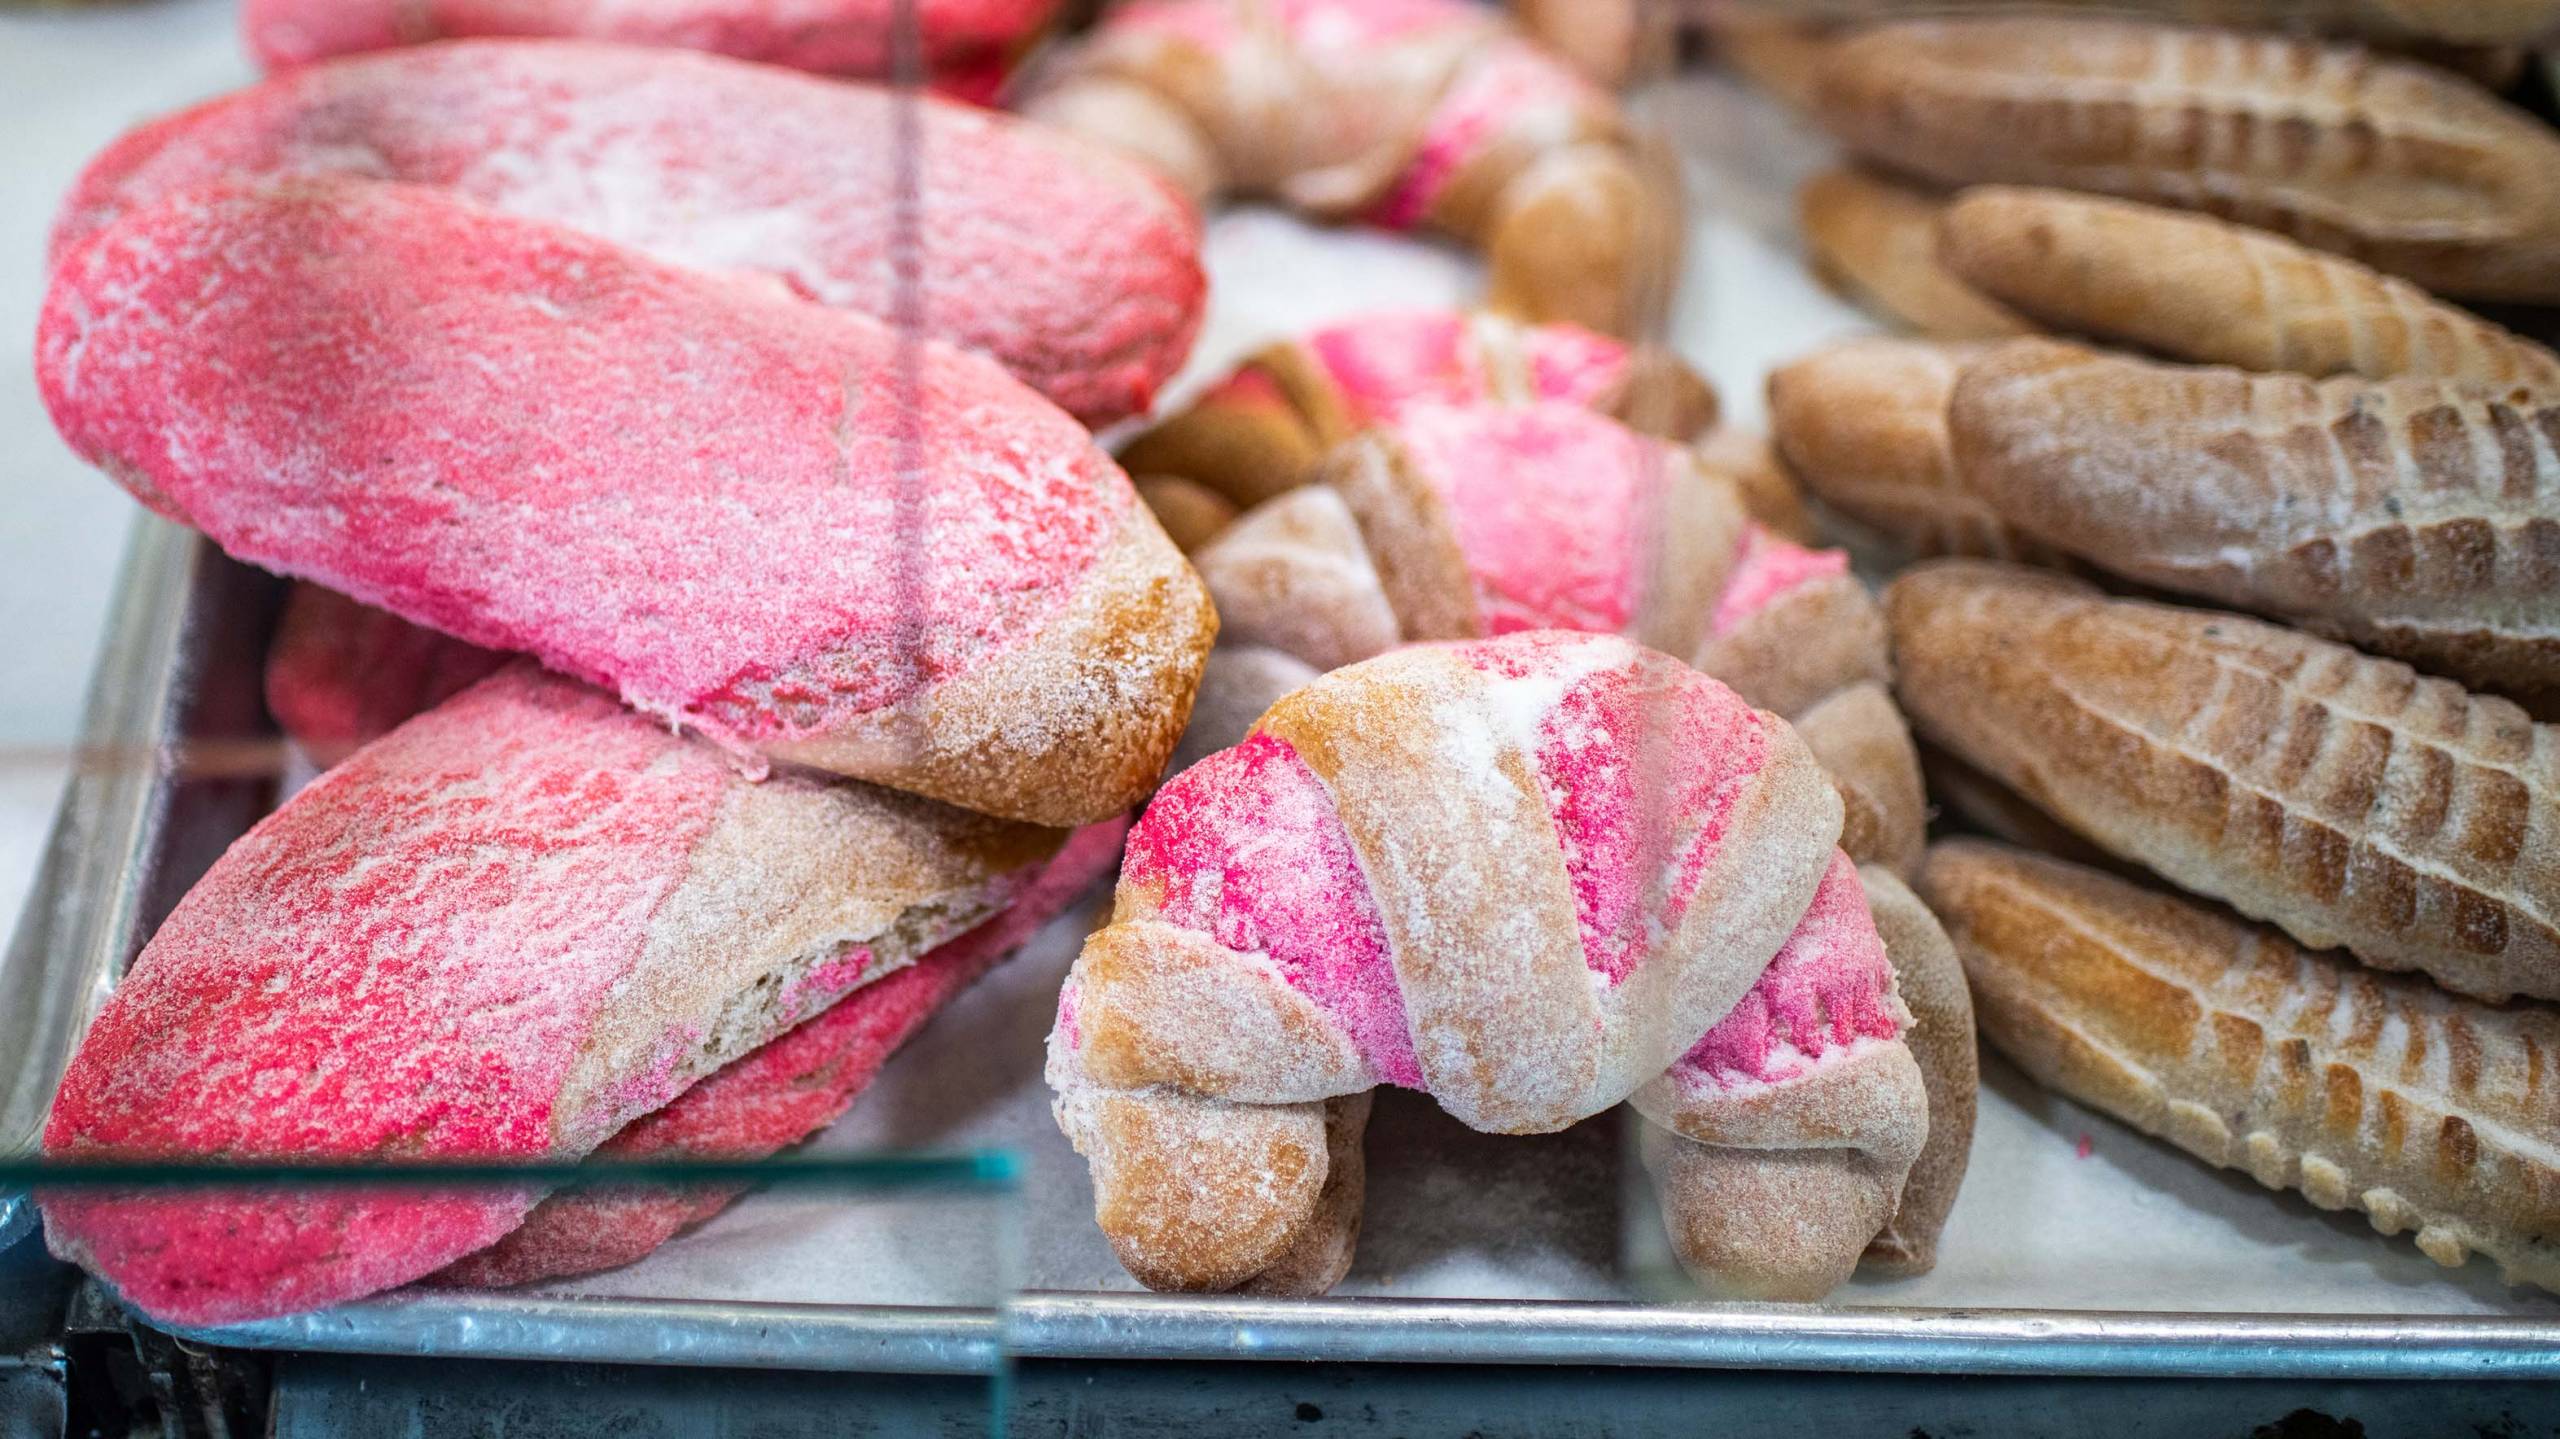 A display case full of colorful pink pastries.